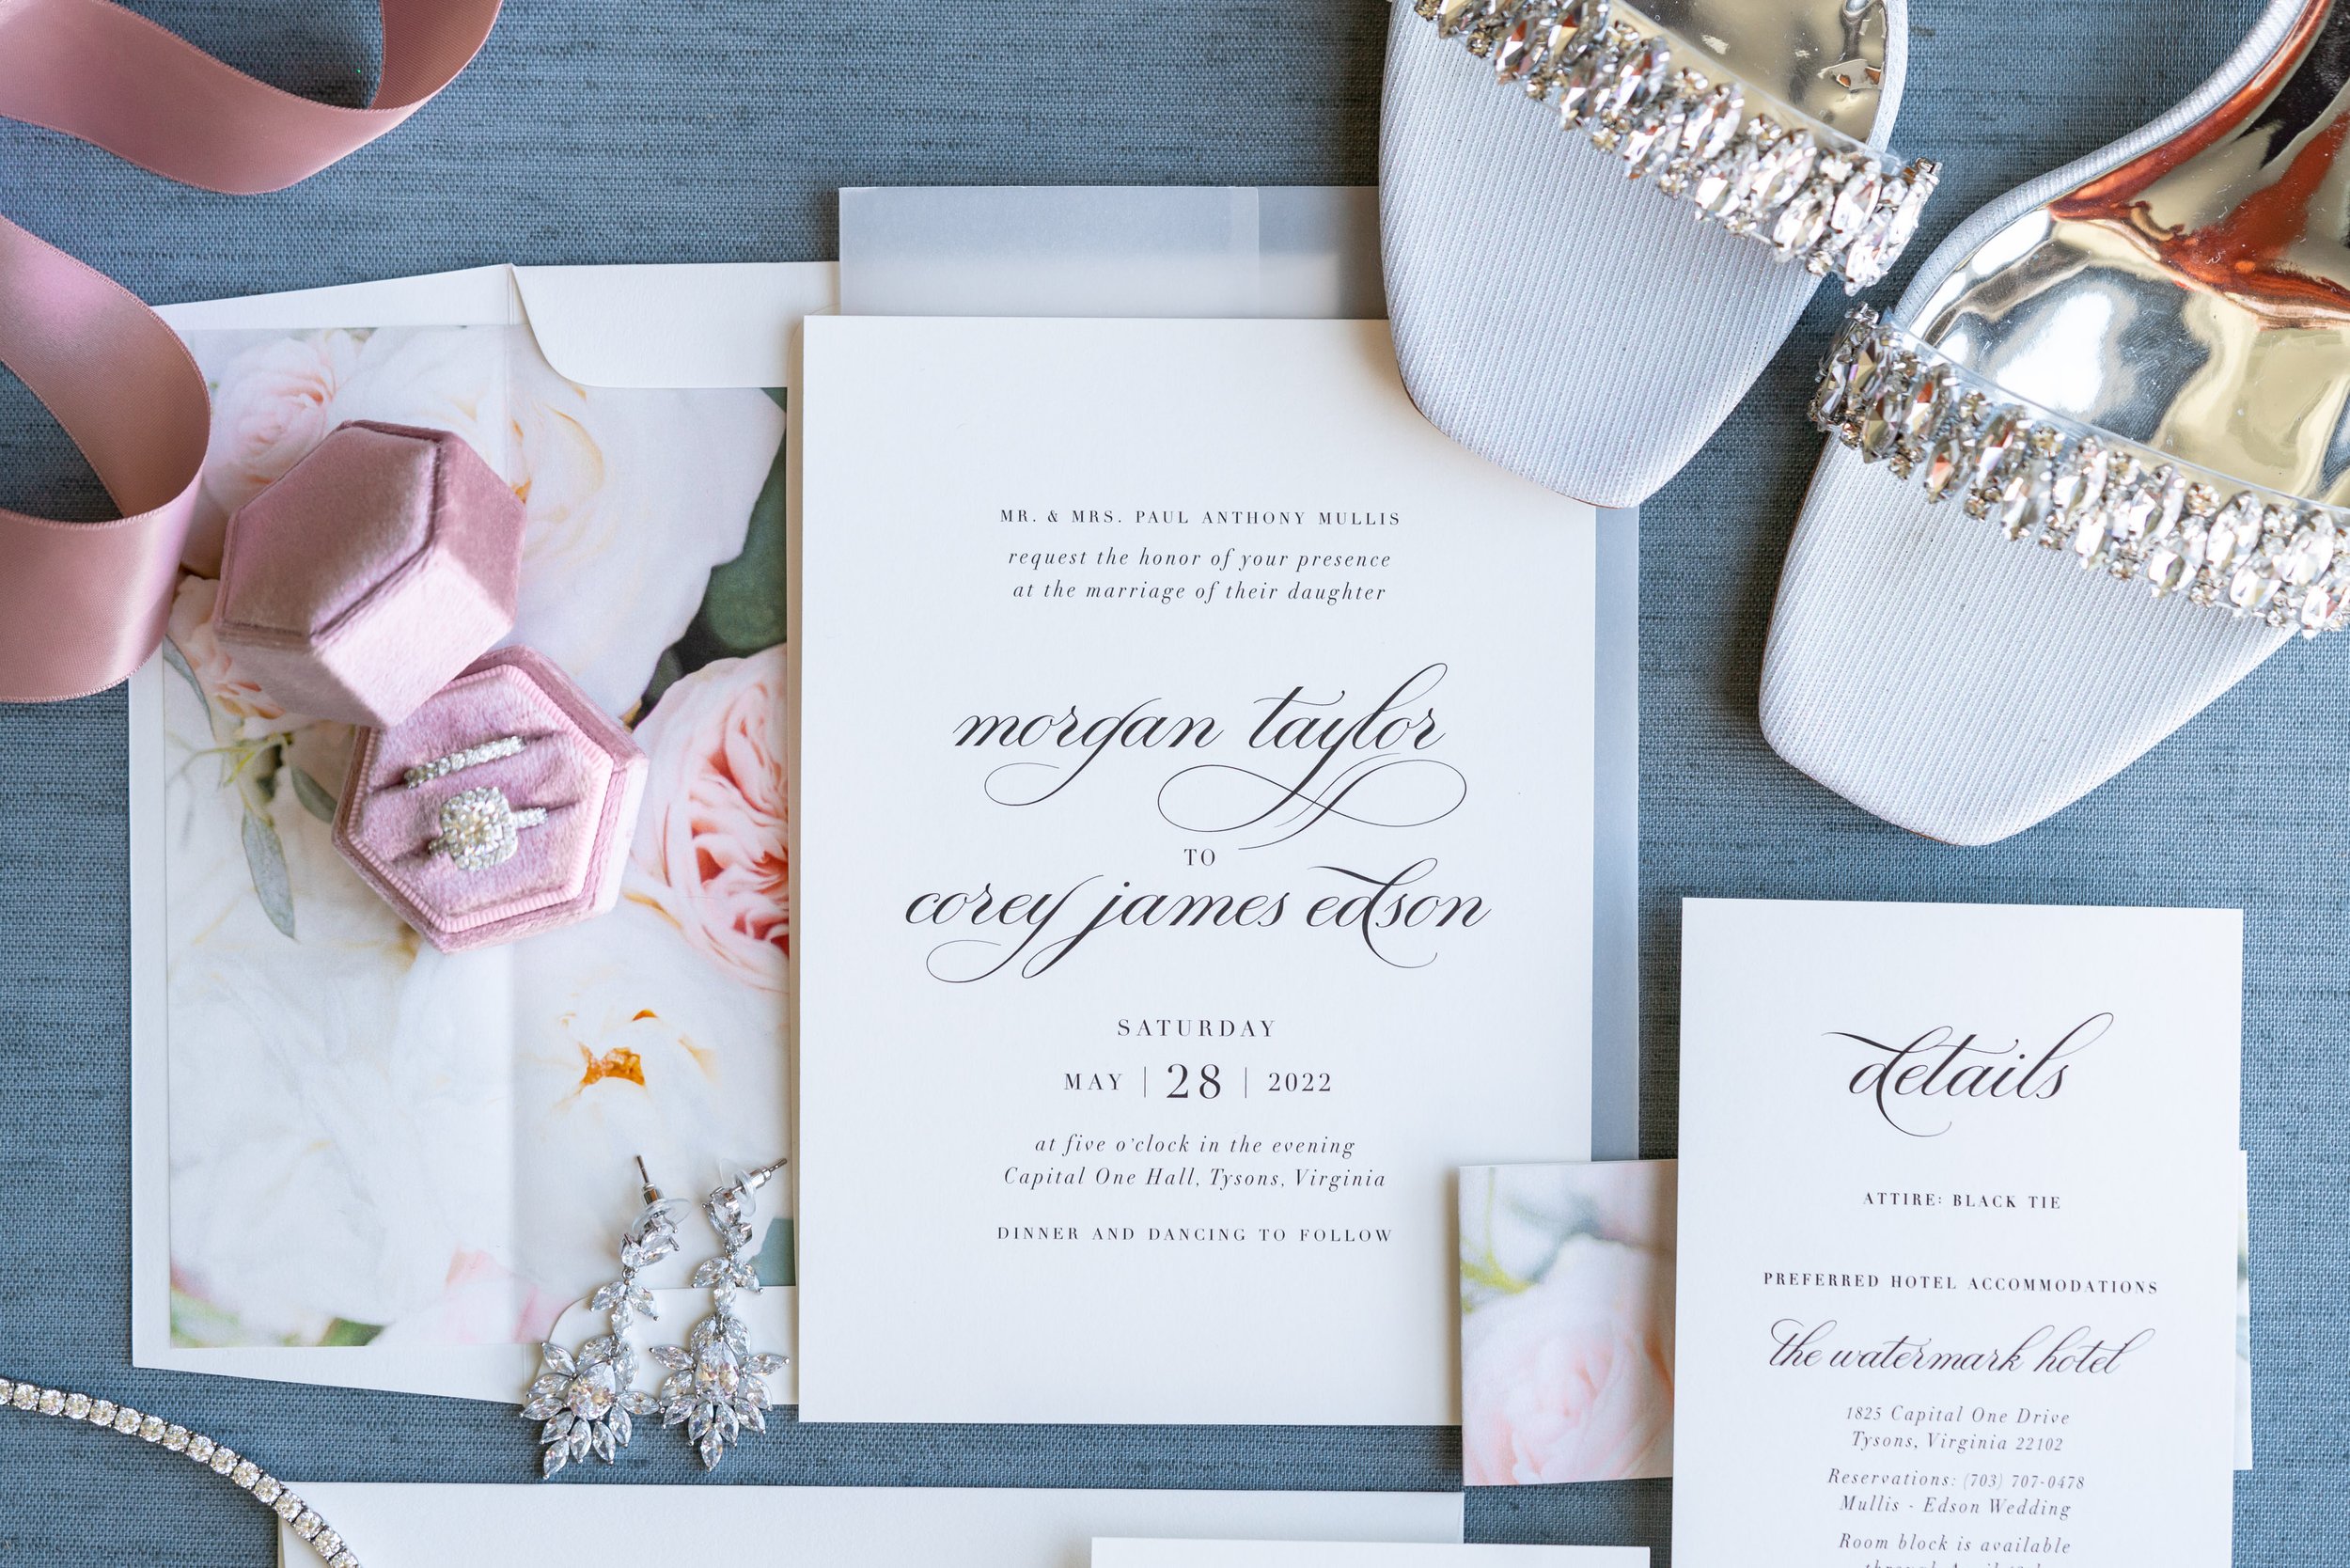 Invitation flat lay image with blue background 